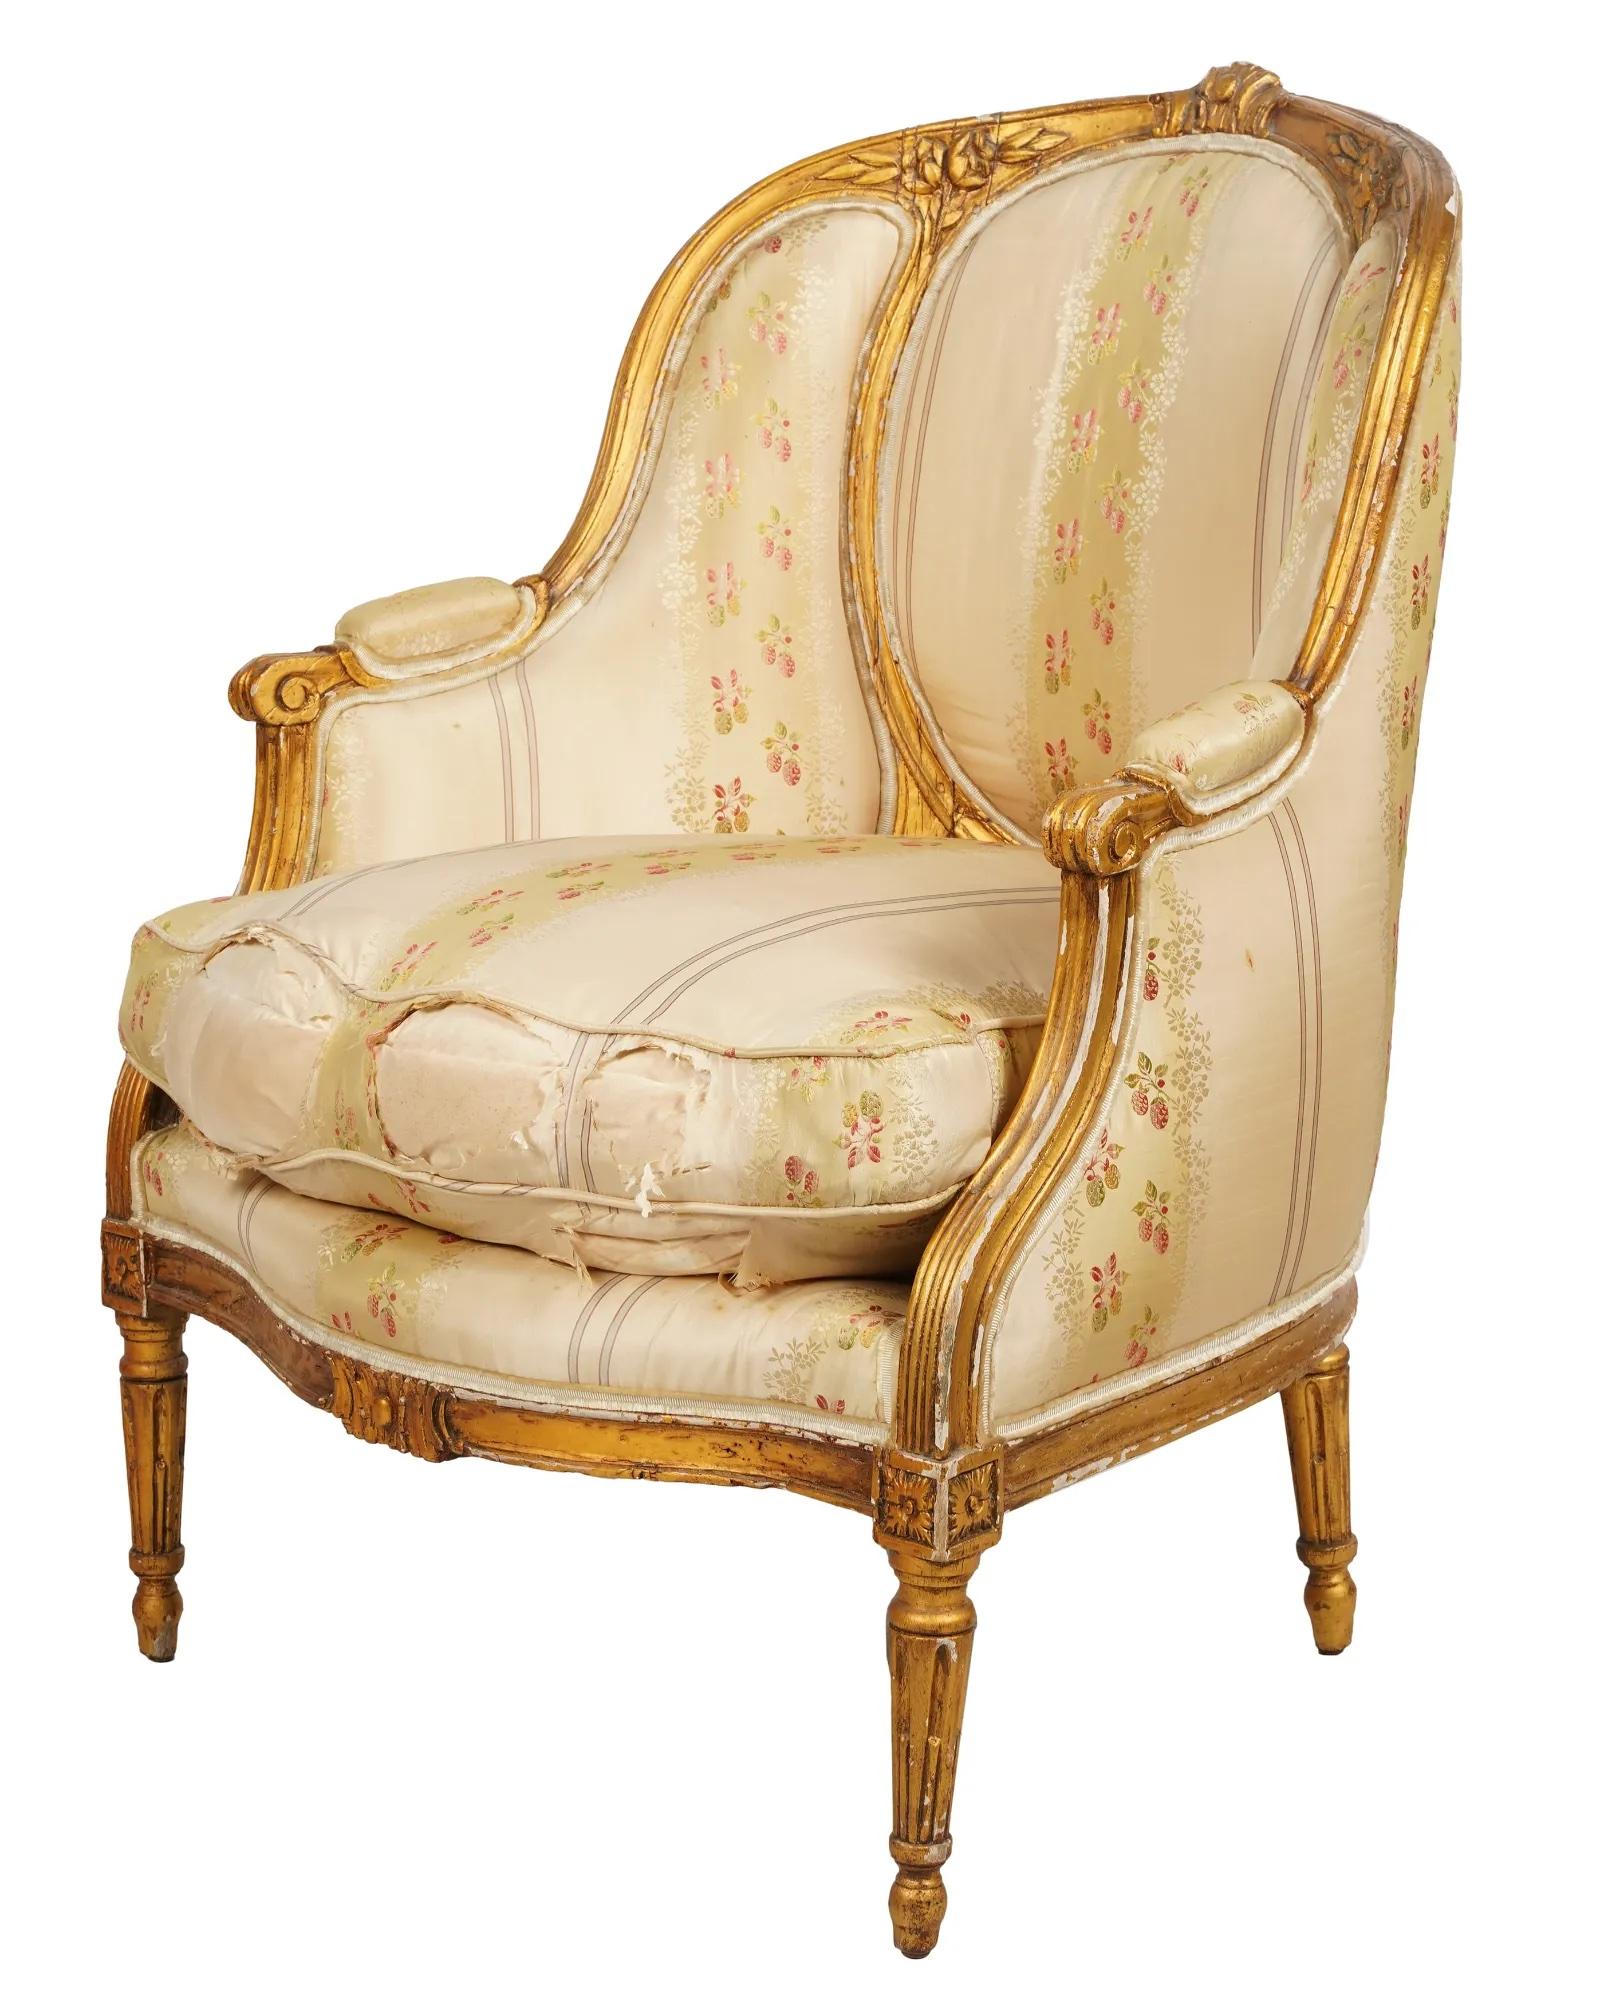 Beautiful Late 19th Century French Louis XVI Style gilt wood settee still retaining remnants of the original gilt gesso finish. Intricate hand carved detailing throughout the frame. Vintage silk damask upholstery has frayed in the front.